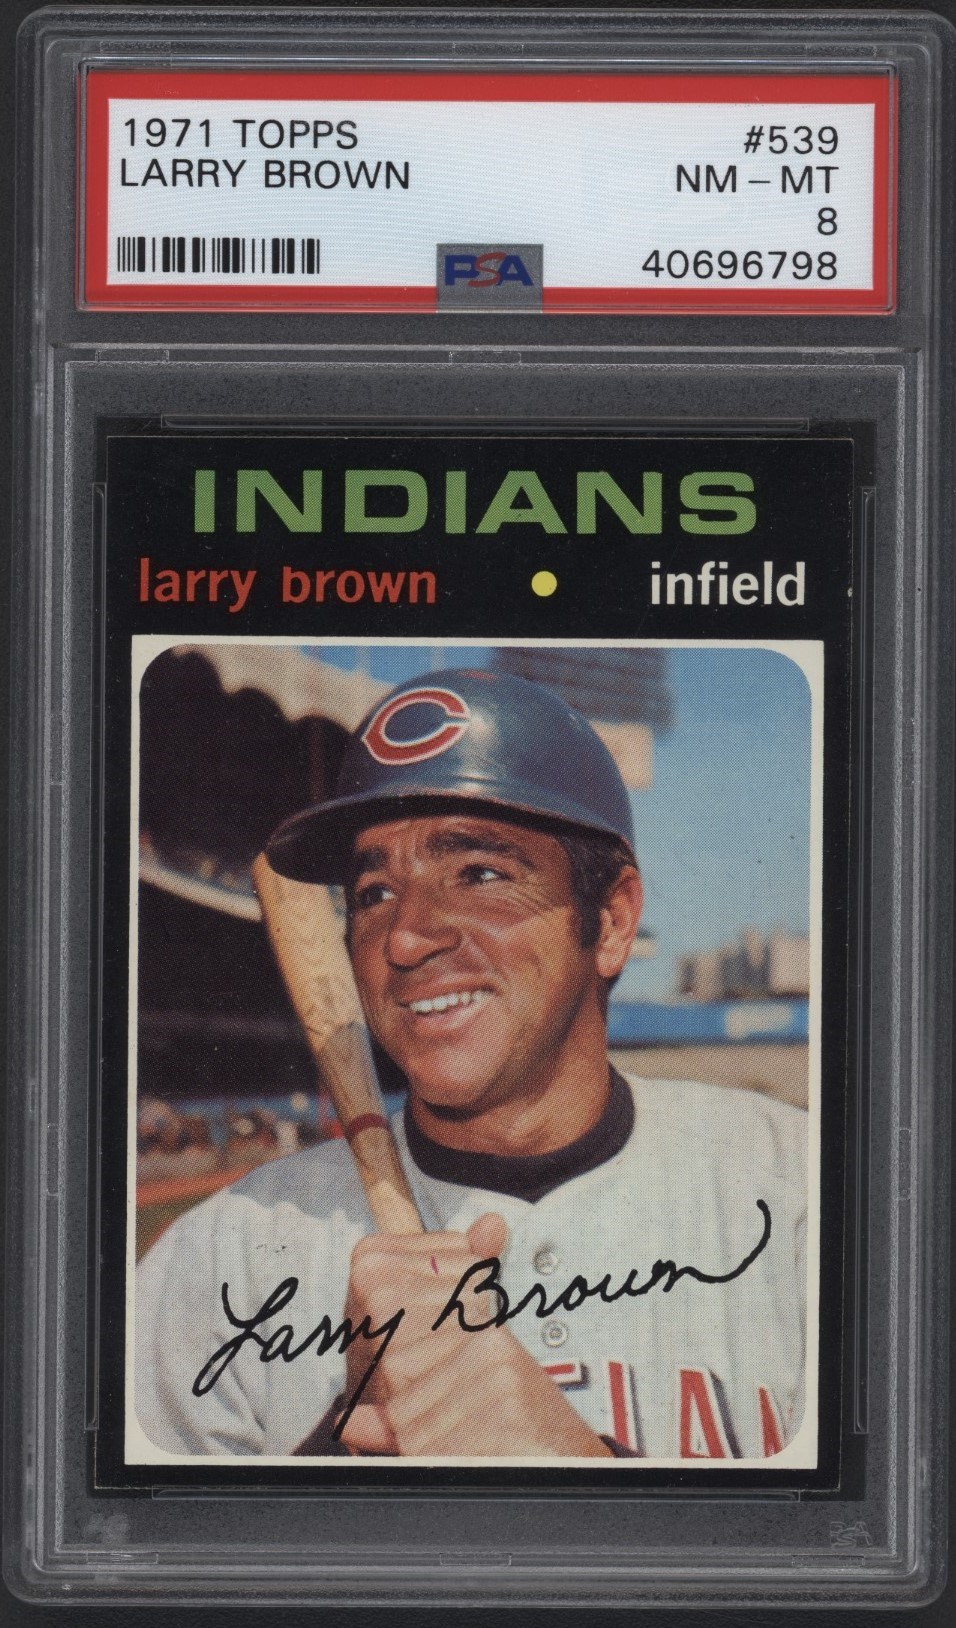 Baseball and Trading Cards - 1971 Topps #539 Larry Brown PSA Graded 8 NM-MT